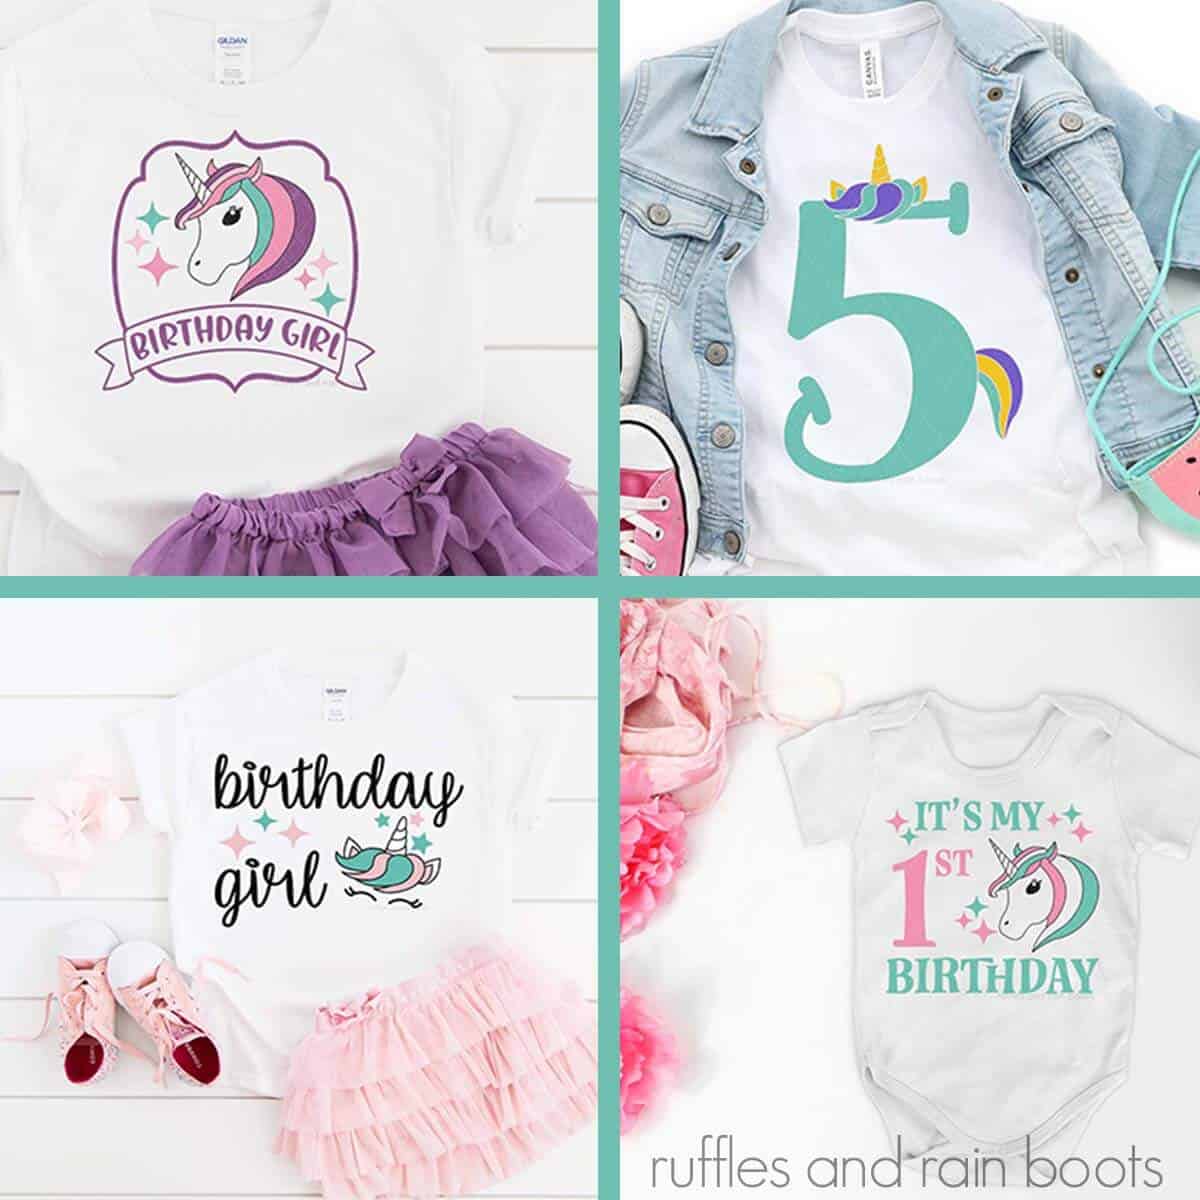 Four image square collage of unicorn birthday shirts and bodysuits.